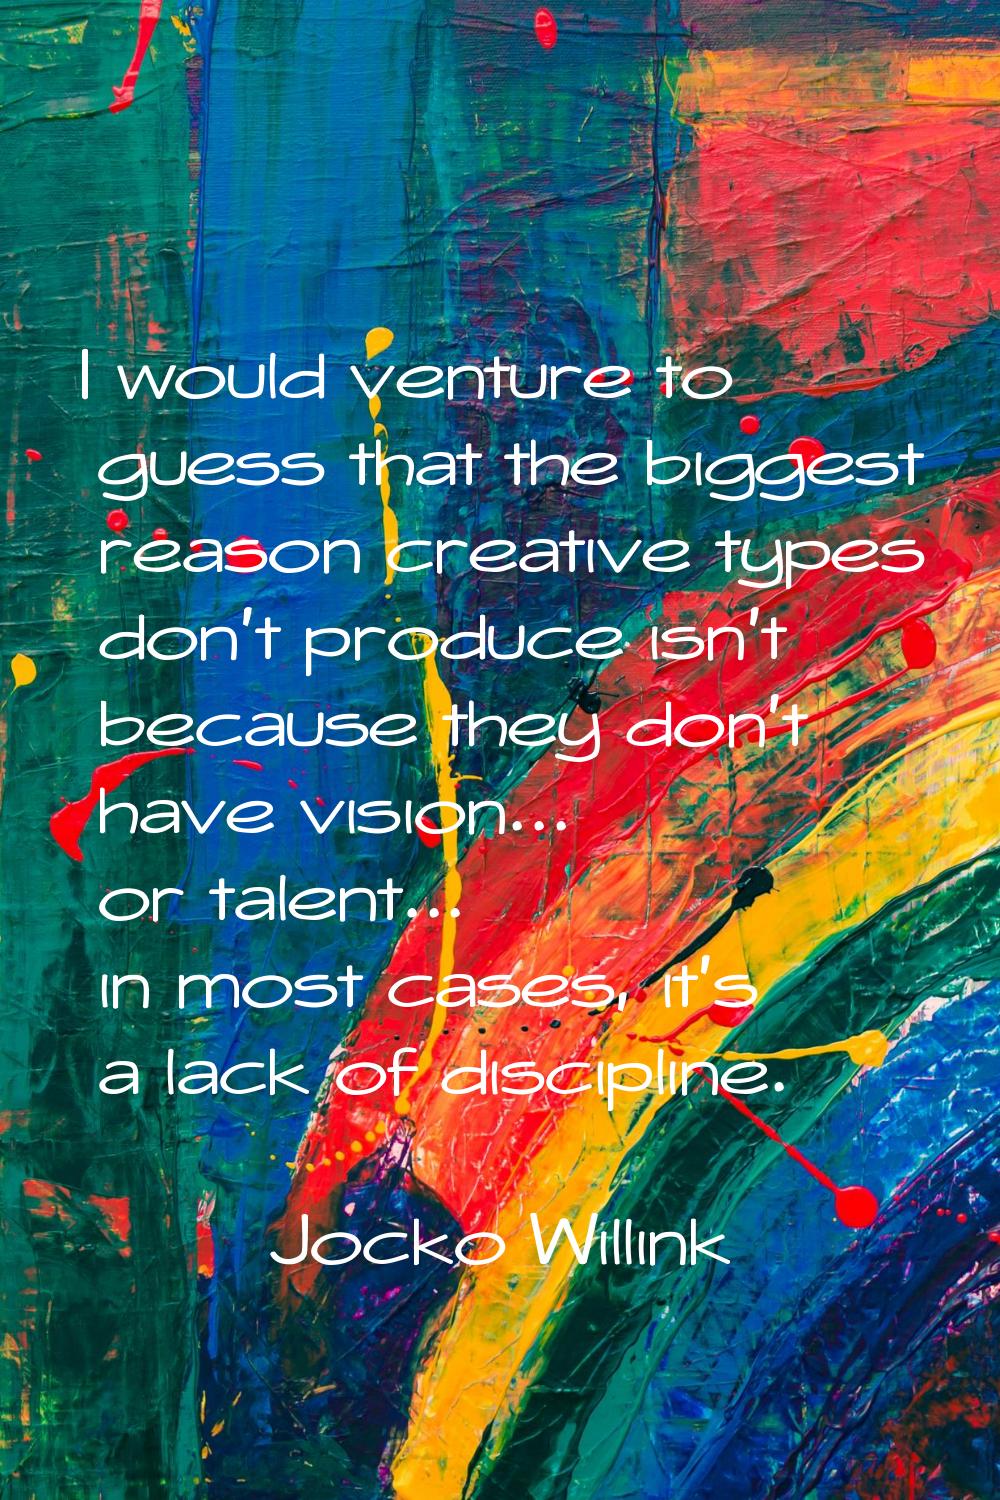 I would venture to guess that the biggest reason creative types don't produce isn't because they do